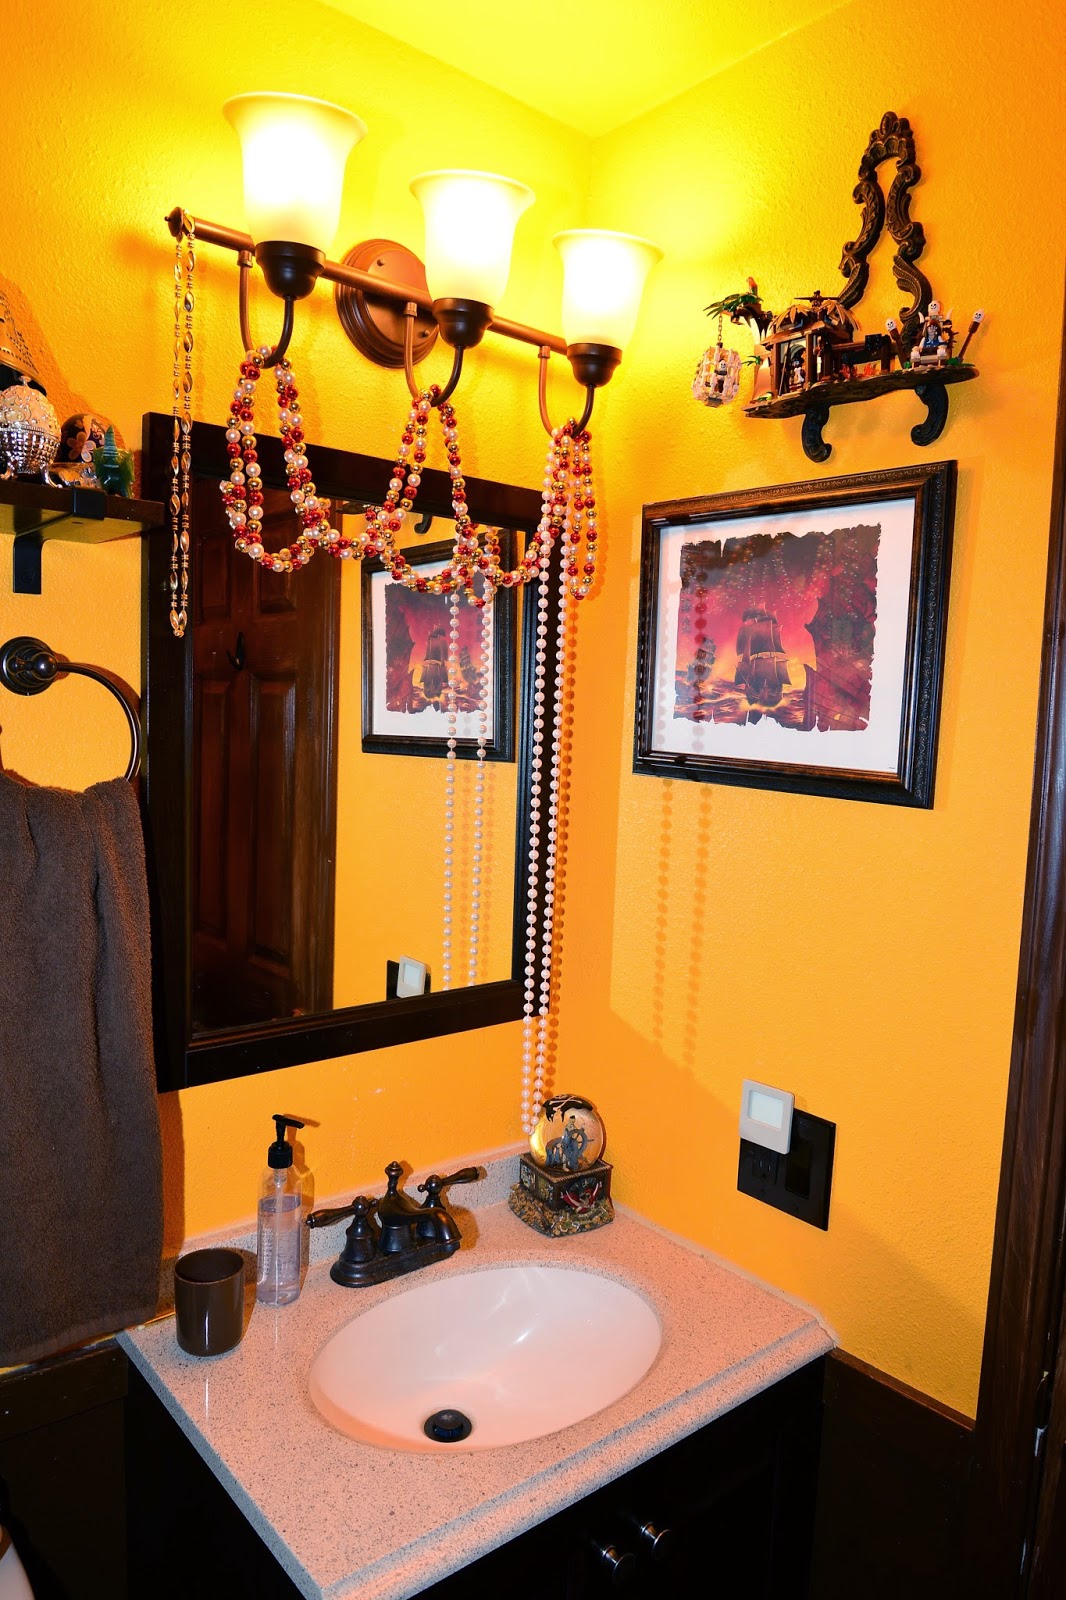 It's Just Me, Isn't It?: The Pirate Bathroom